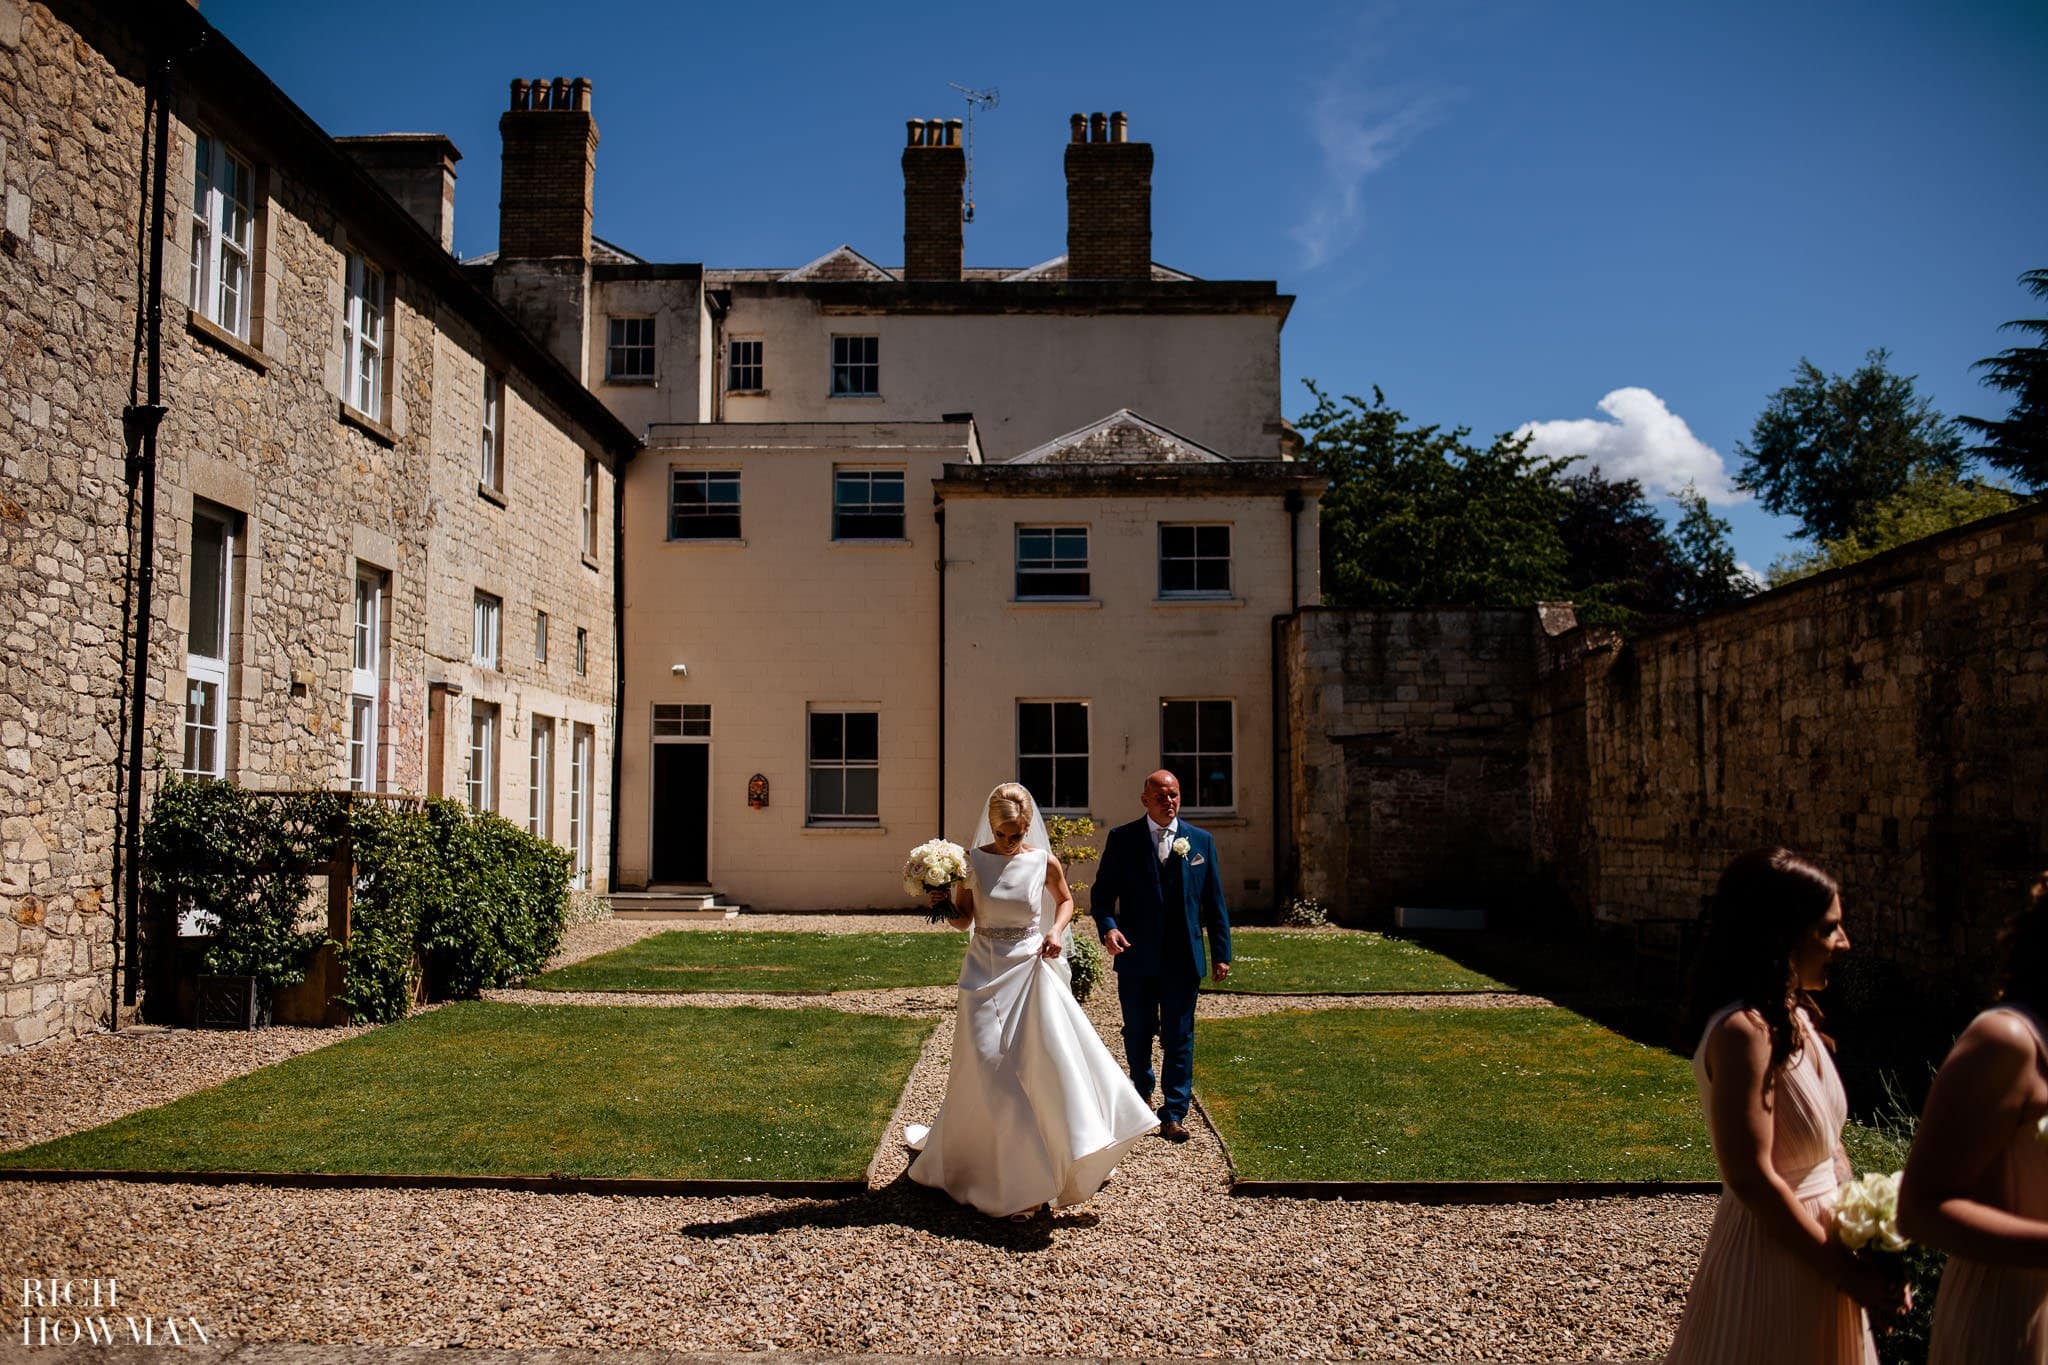 bride and groom outside manor house captured by eastington park wedding photographer, rich howman